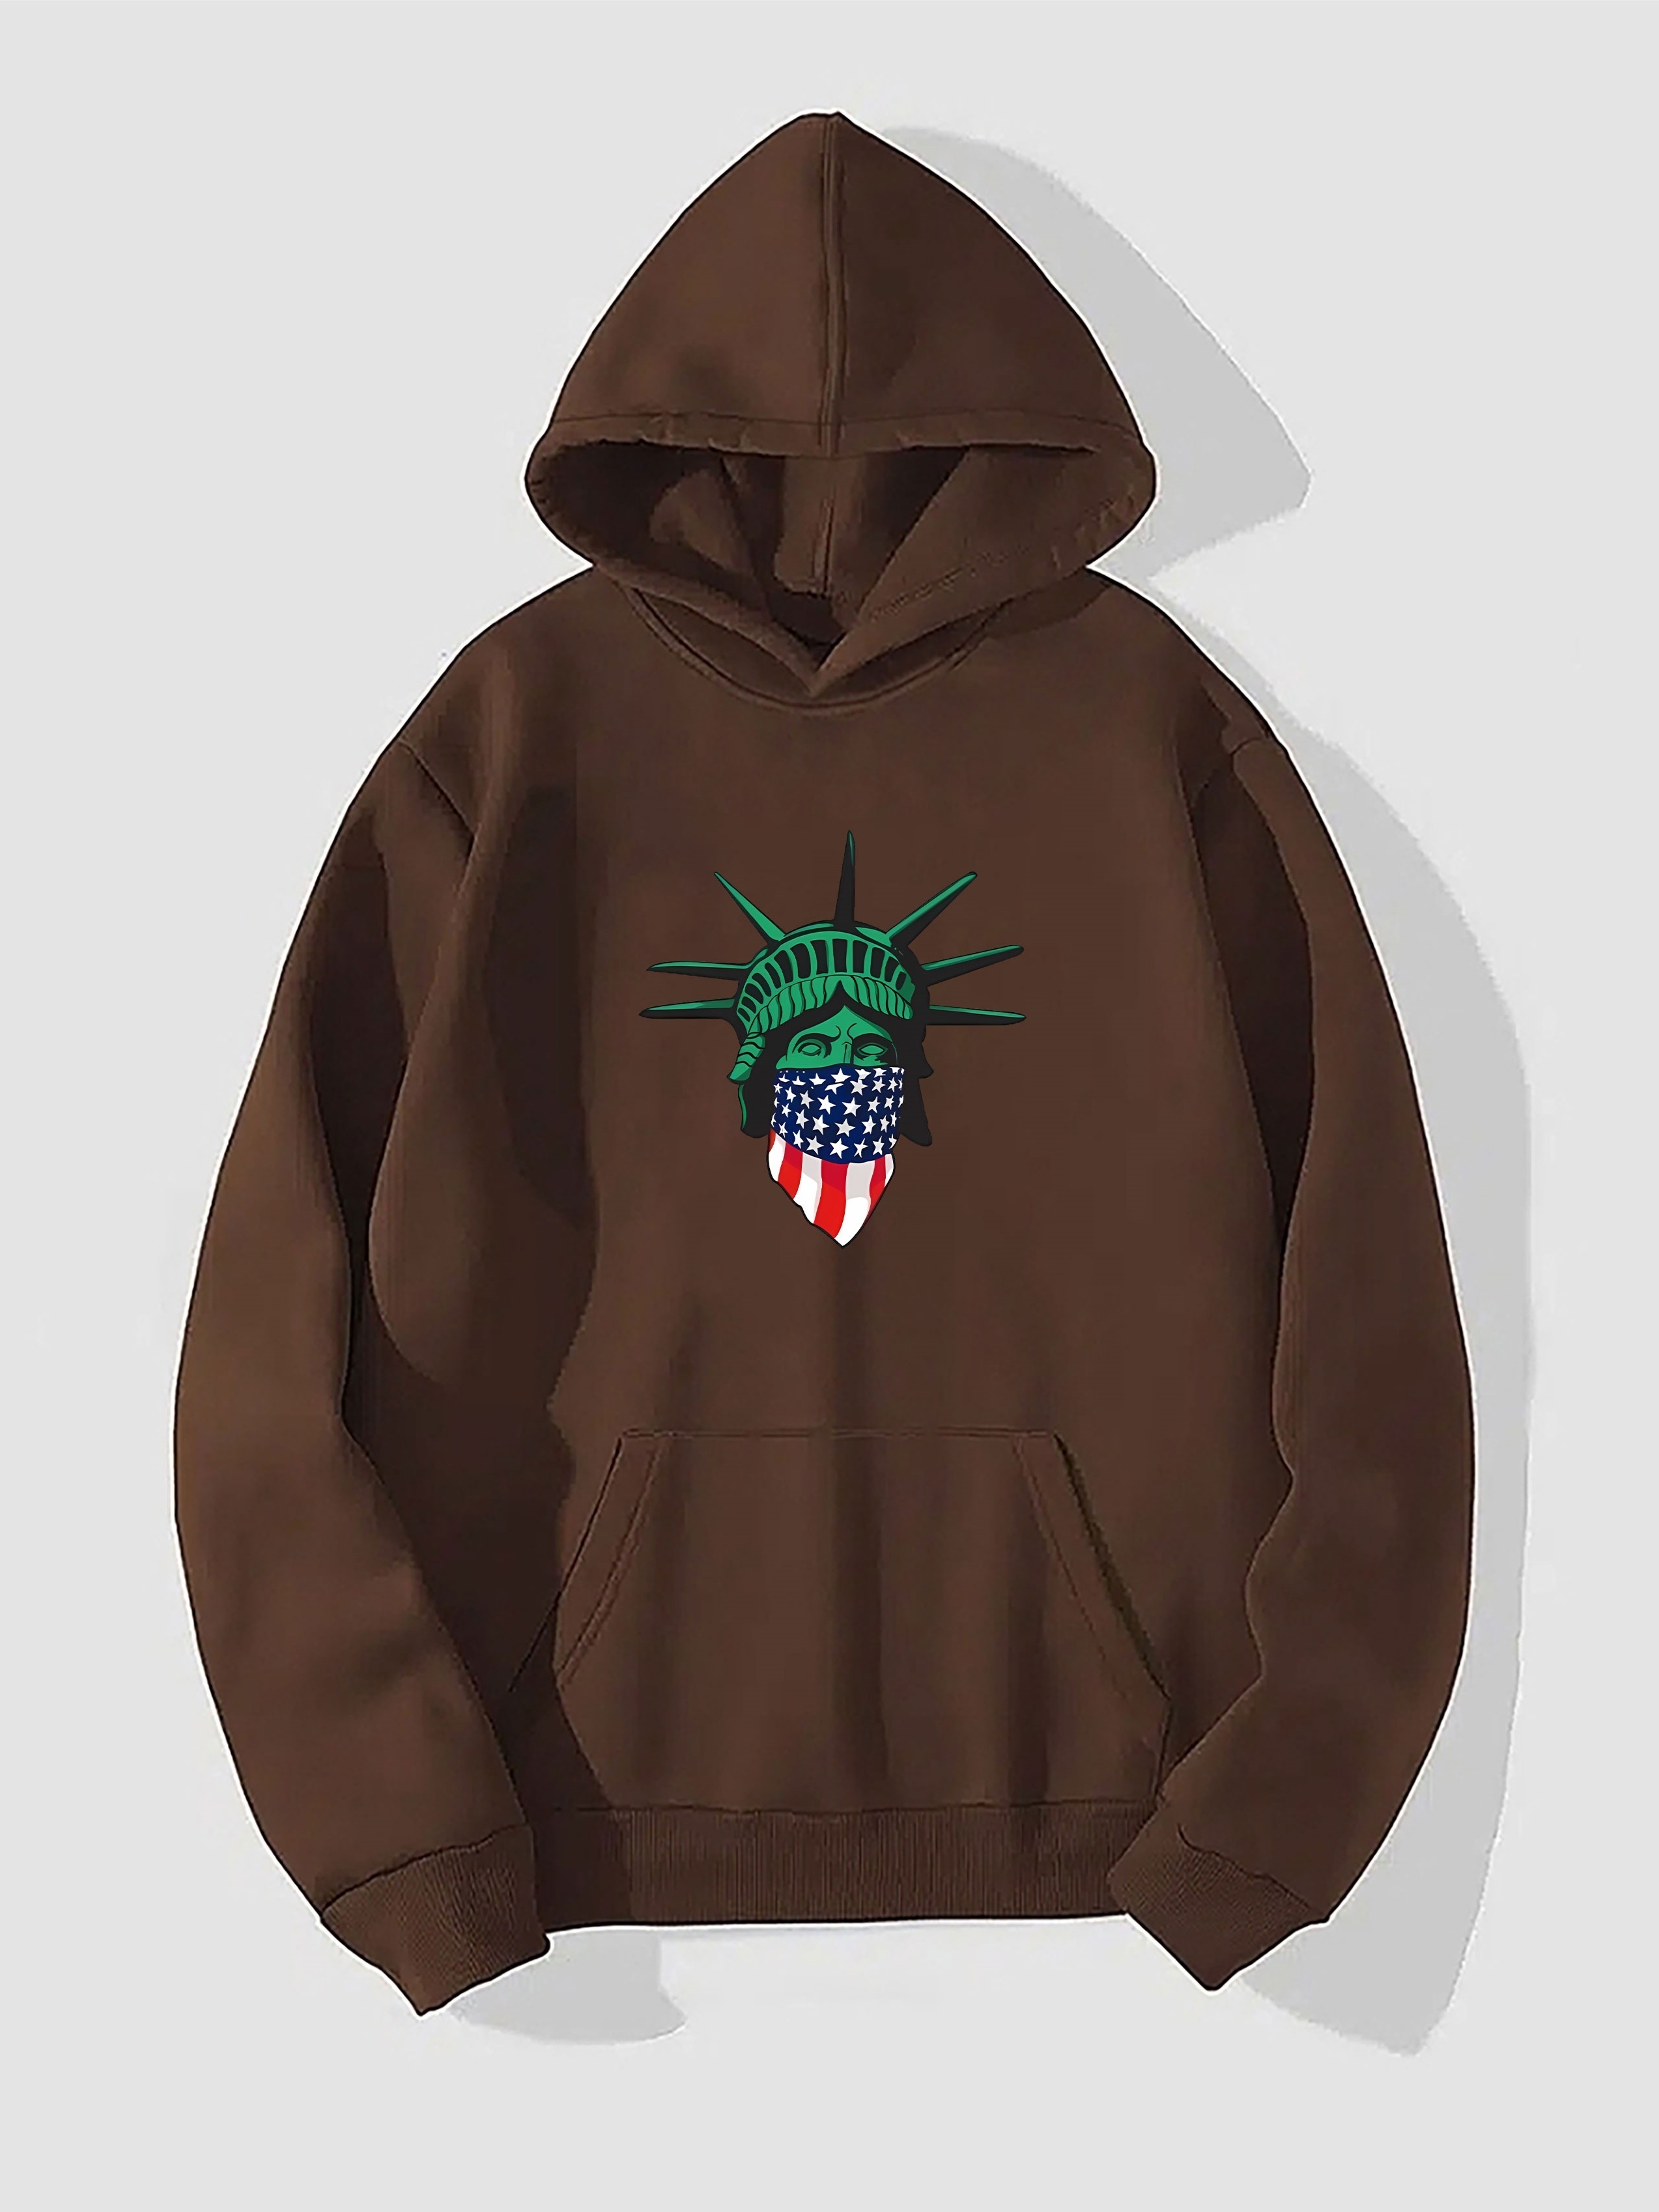 Statue Of Liberty With Mask Print Hoodie, Hoodies For Men, Men's